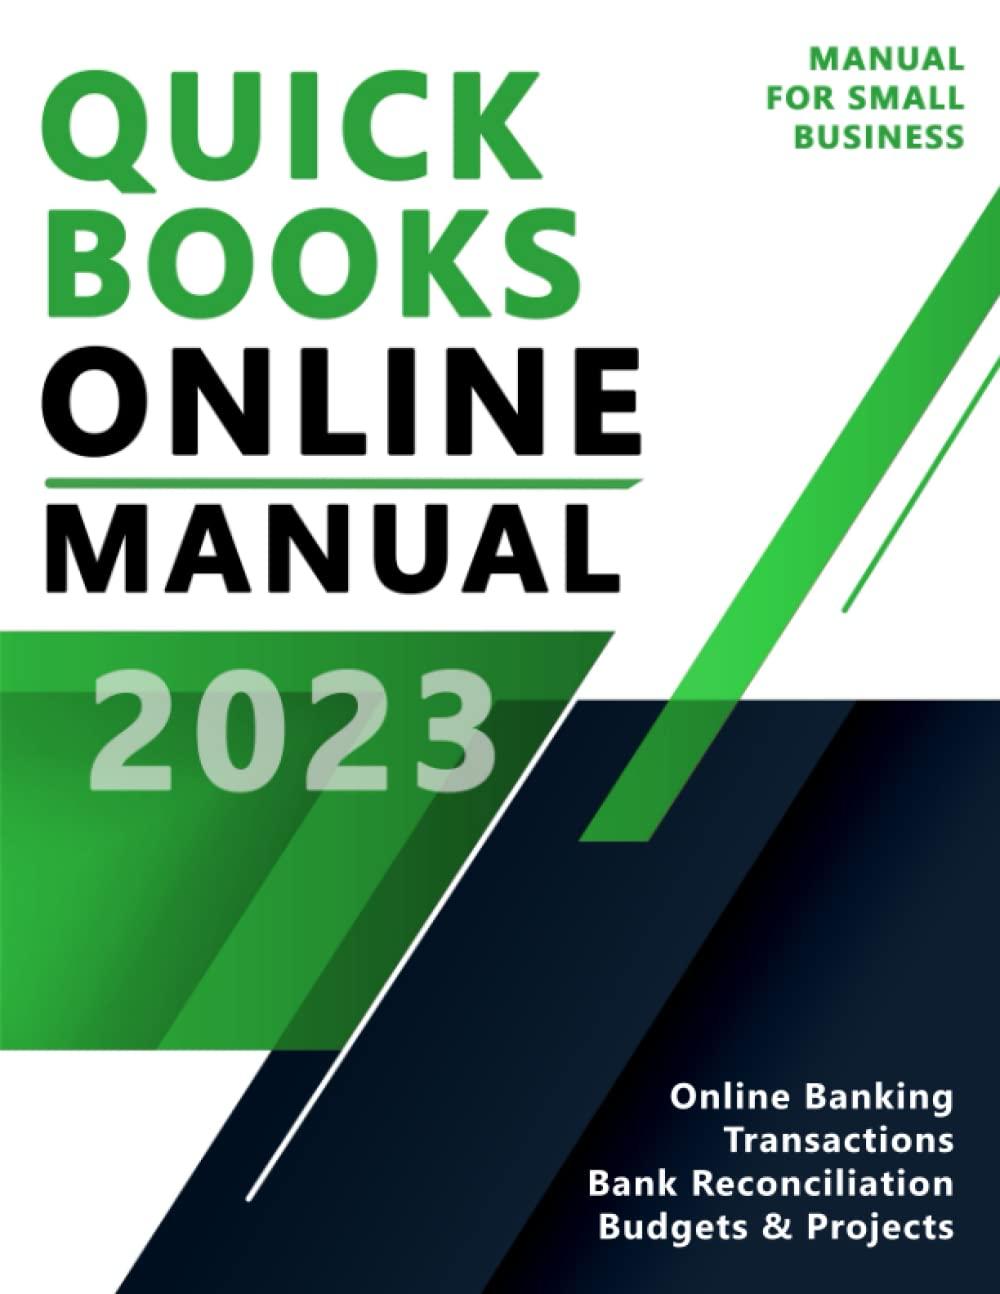 quickbooks online manual for small business 1st edition ukrainian printworks b0c47tpls5, 979-8393942502